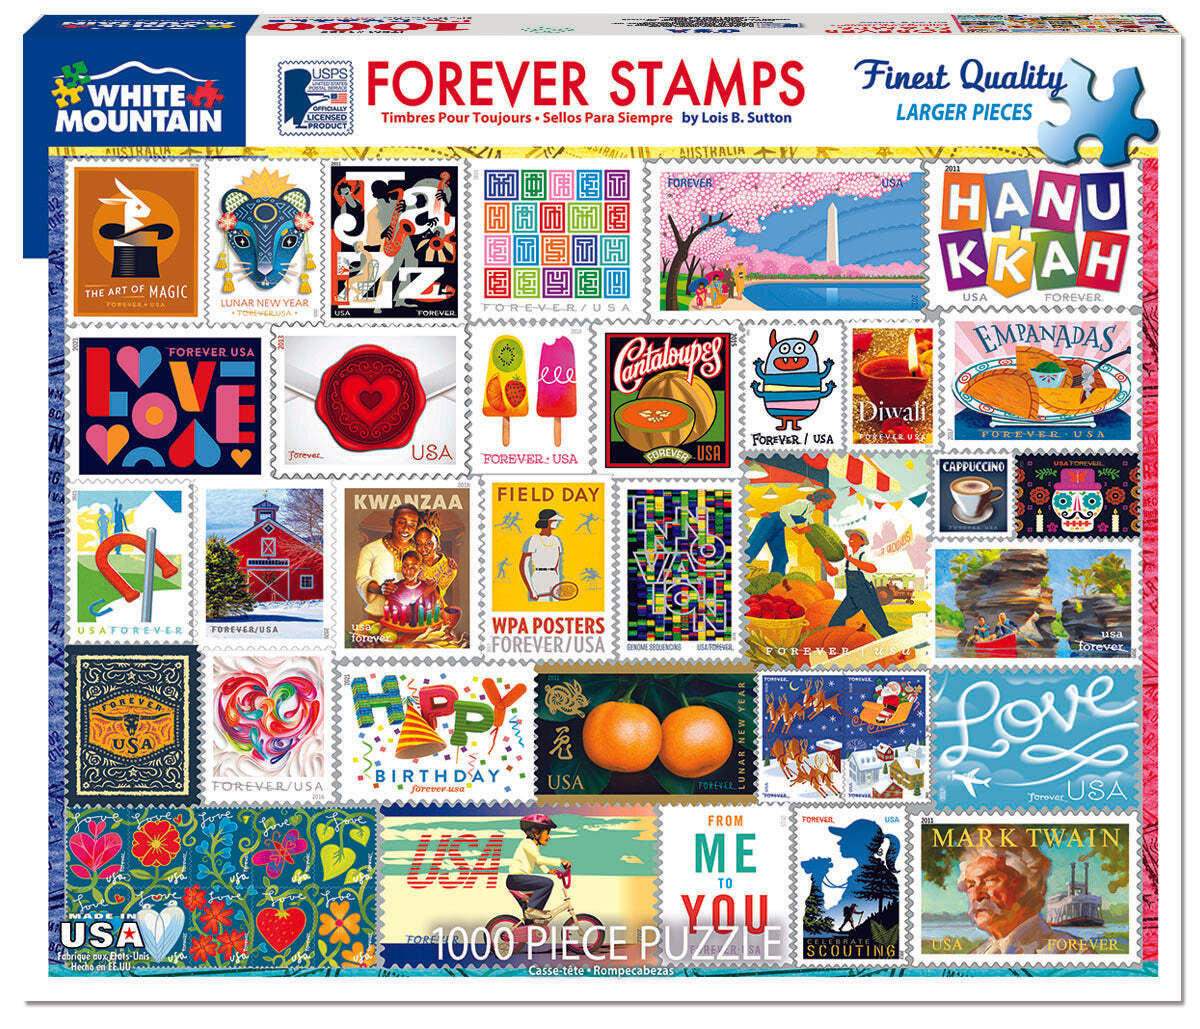 Forever Stamps (1629pz) - 1000 Piece Jigsaw Puzzle